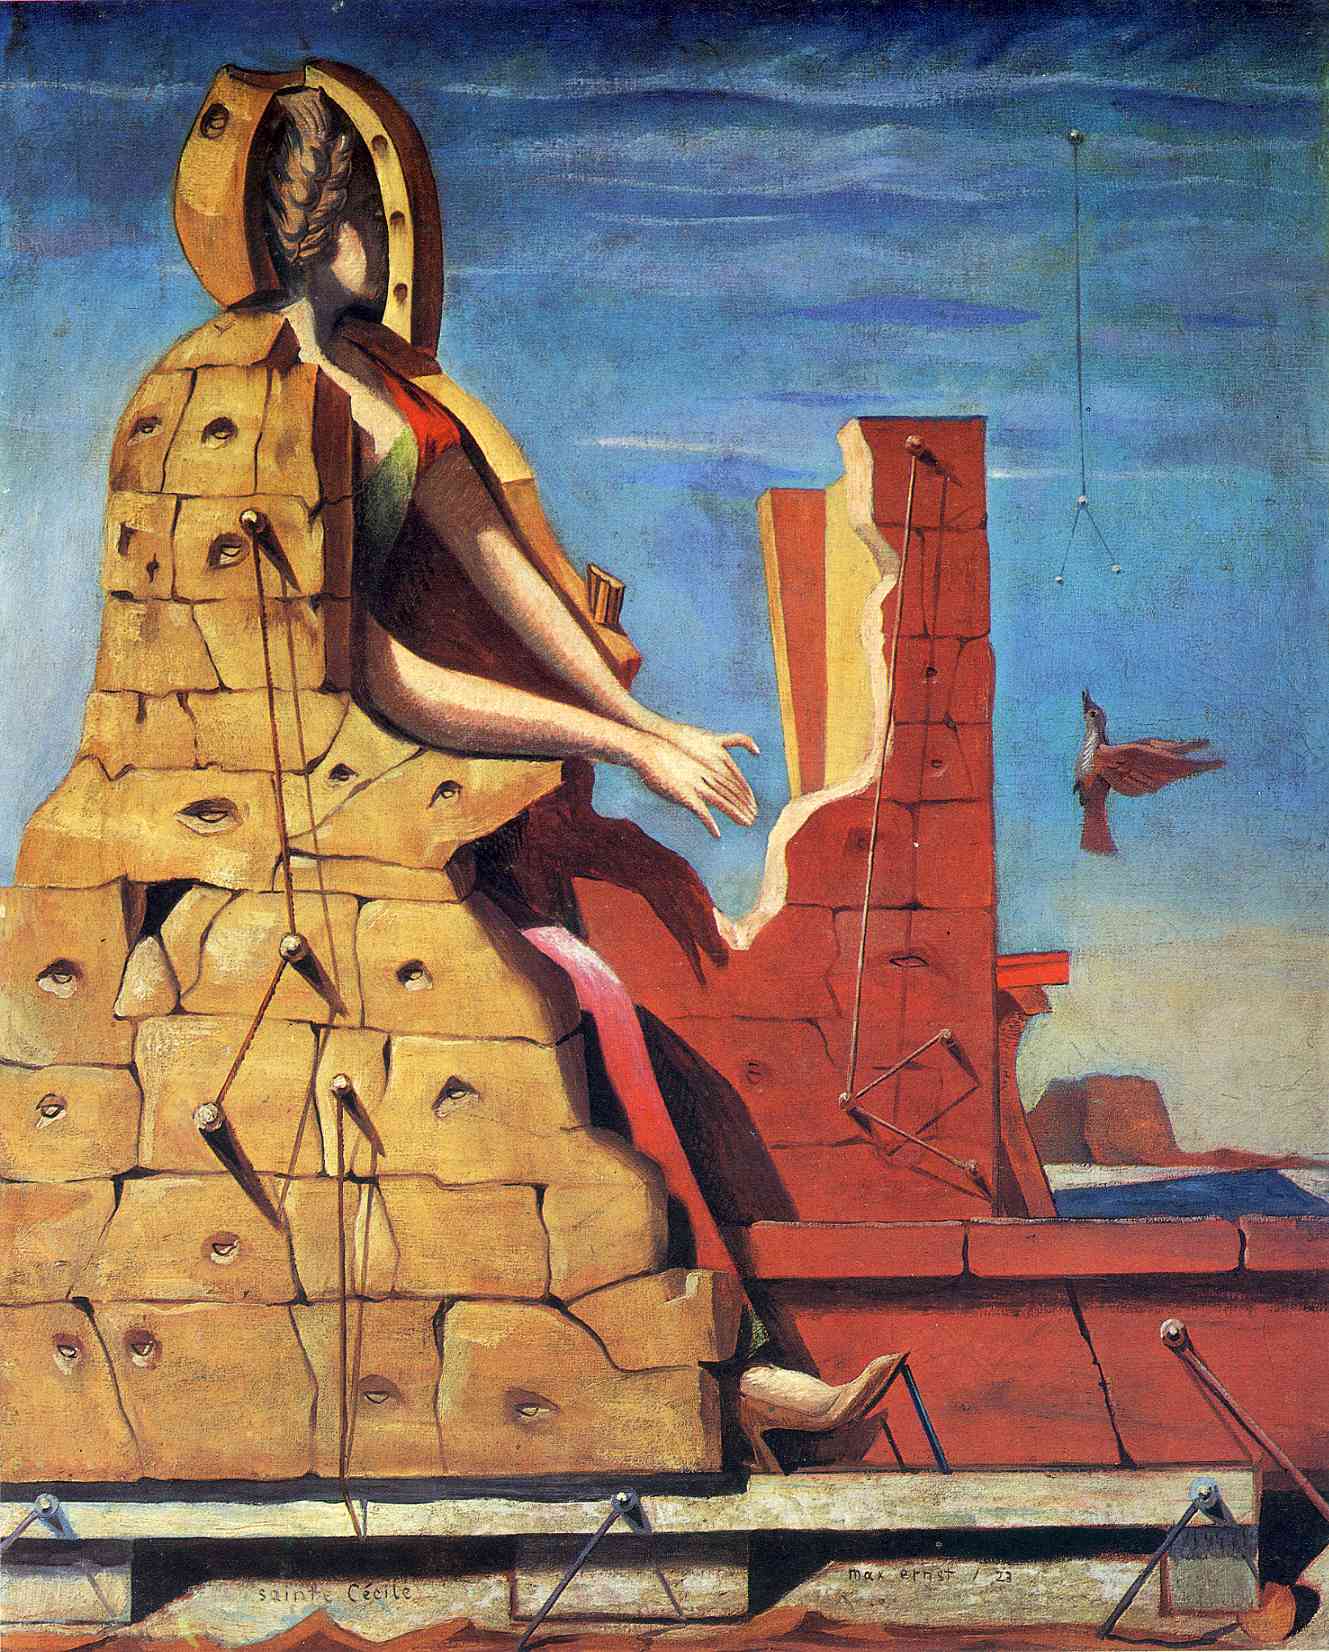 Paintings by Max Ernst